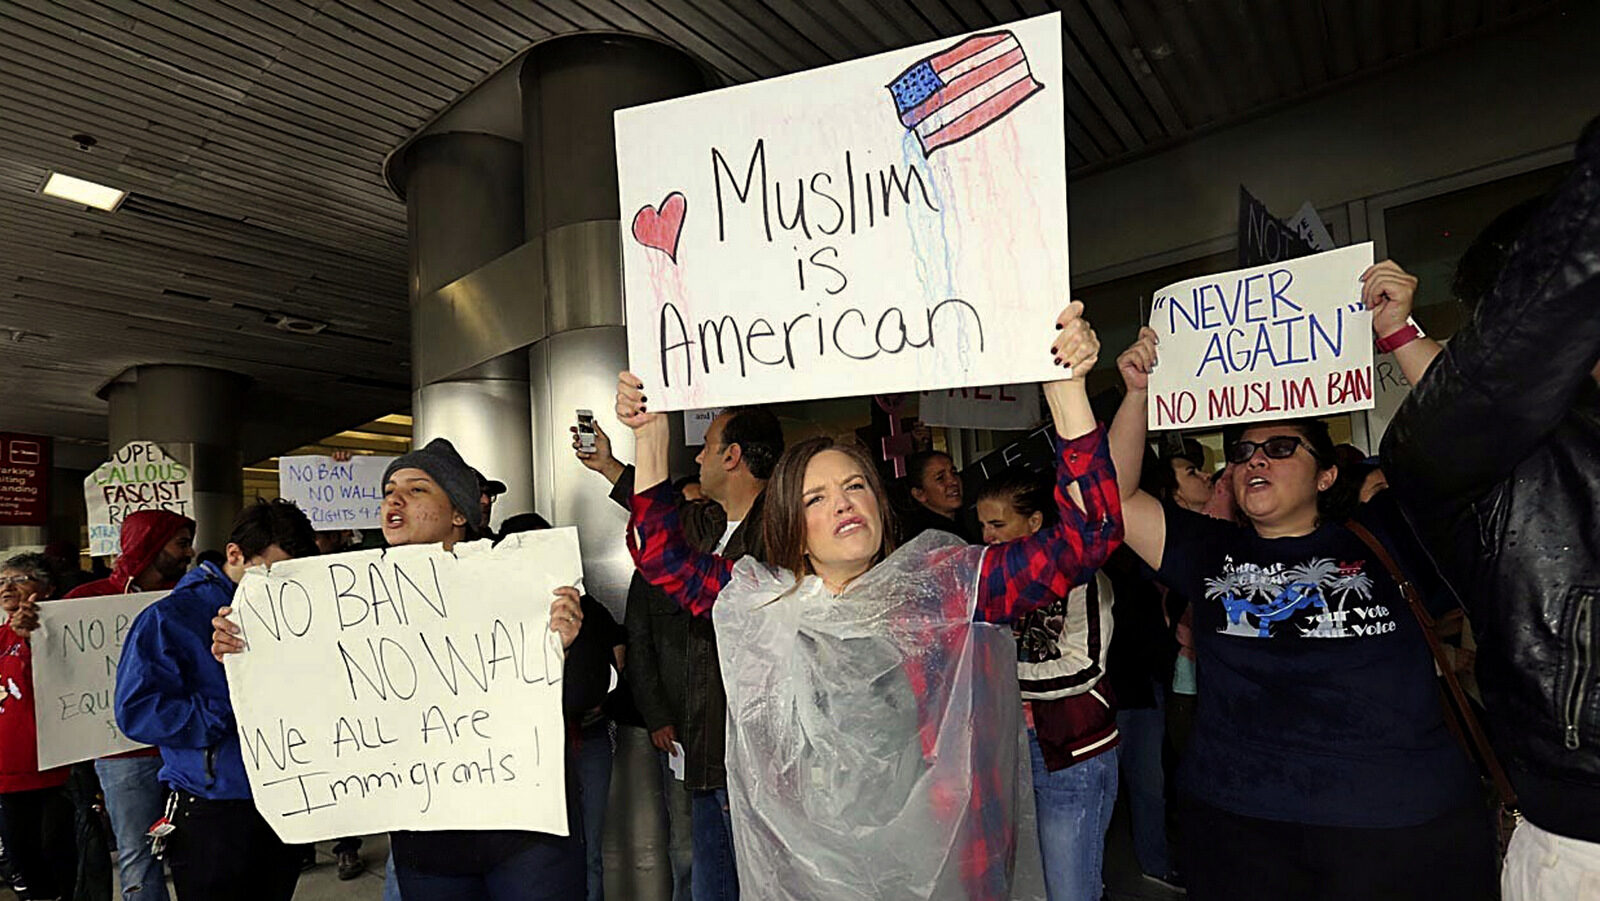 Protesters rally against President Trump's refugee ban at Miami International Airport on Sunday, Jan. 29, 2017.President Donald Trump’s immigration order sowed more confusion and outrage across the country Sunday, with travelers detained at airports, panicked families searching for relatives and protesters registering their opposition to the sweeping measure. (C.M. Guerrero/El Nuevo Herald via AP)